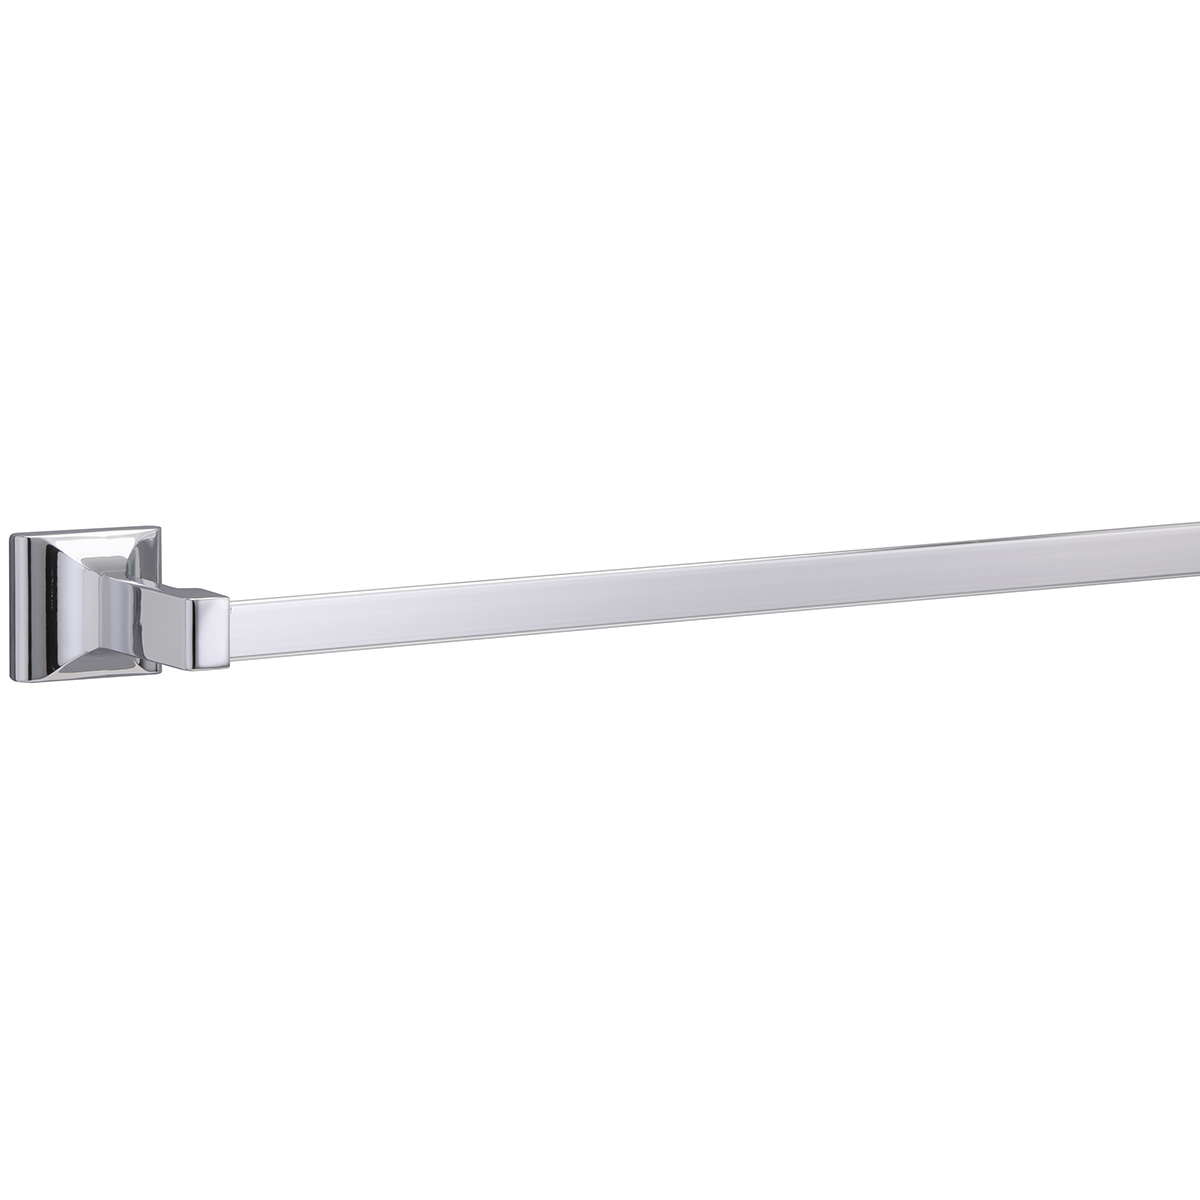 Sunglow - Towel Bar Stainless Steel - 18 - Stainless Steel